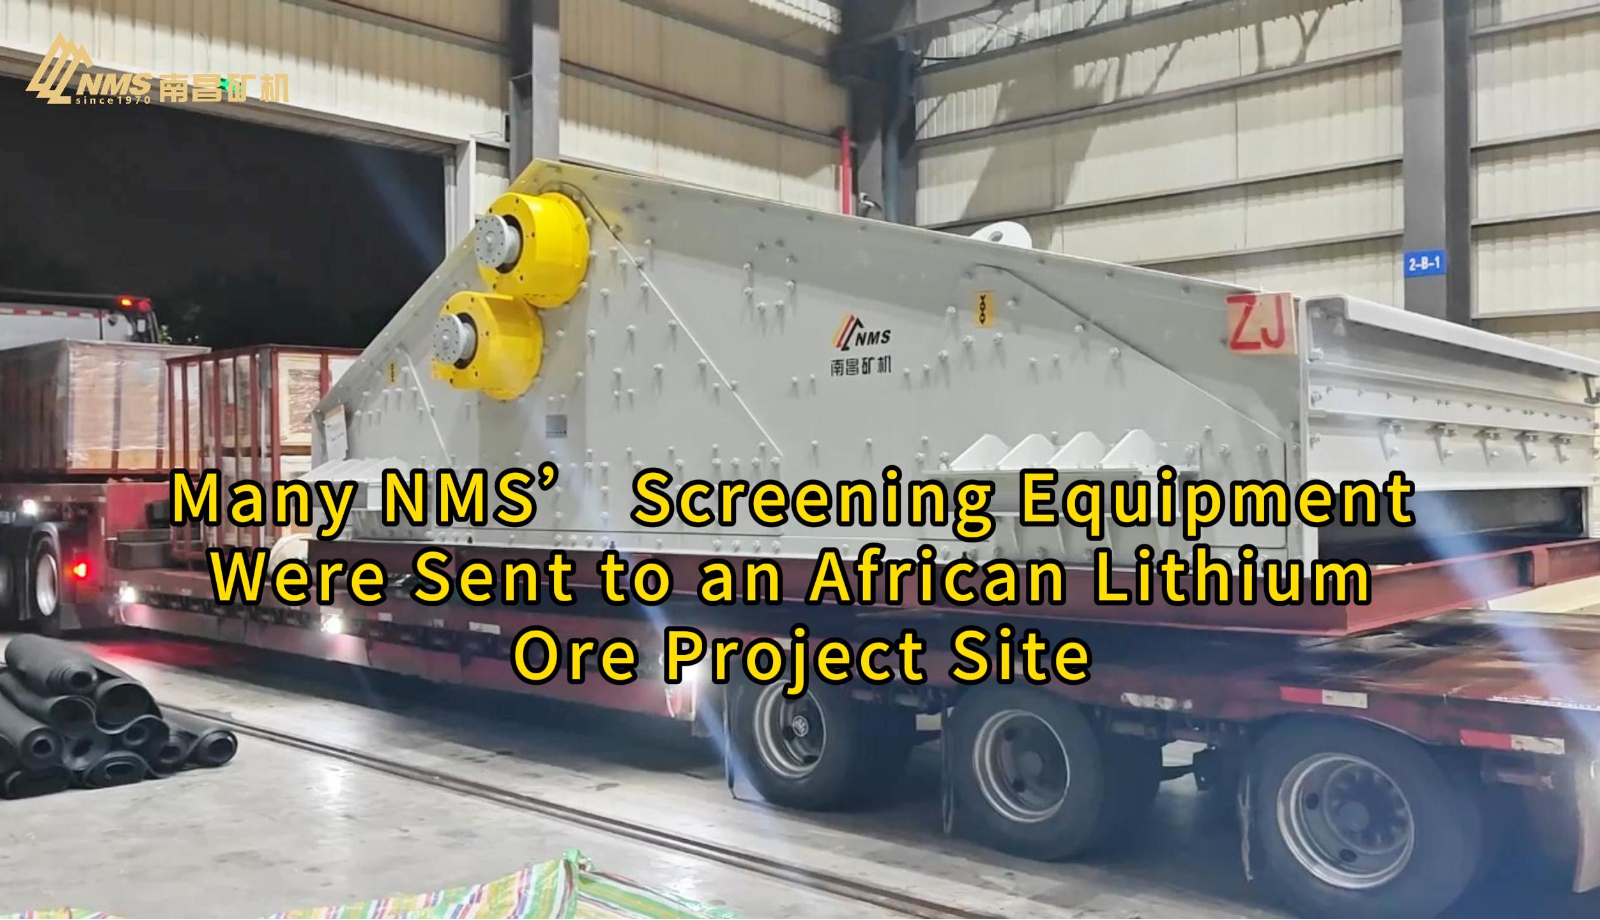 Many NMS’ Screening Equipment Were Sent to an African Lithium Ore Project Site